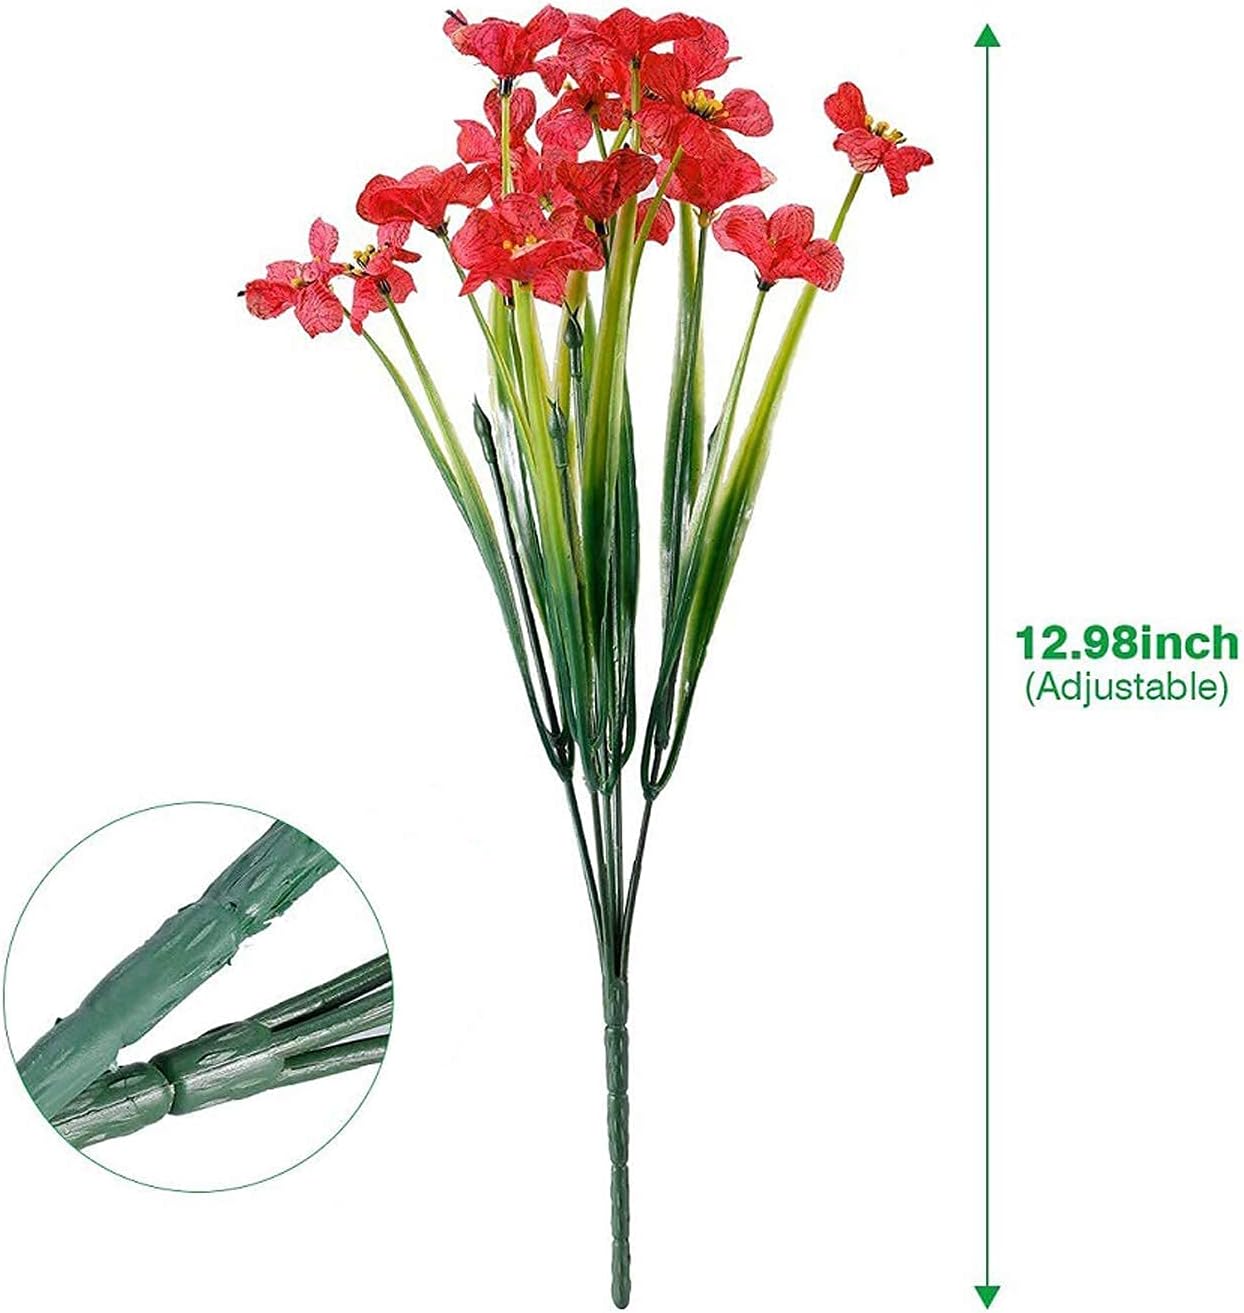 20 Bundles UV-Resistant Artificial Red Flowers: Perfect for Outdoor D&#xE9;cor